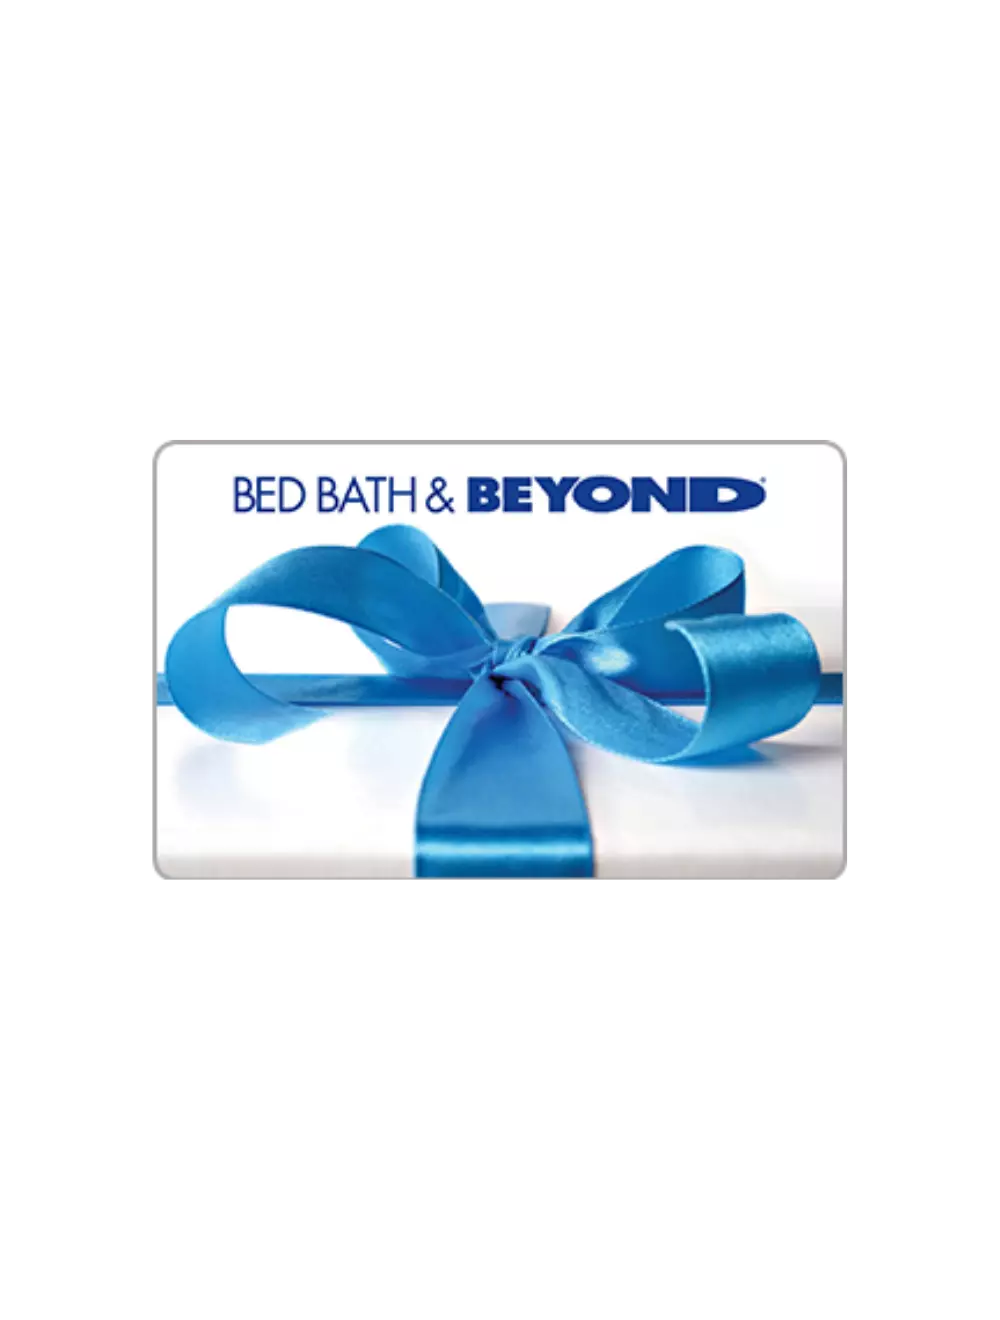 27 Golden Rules You Must Follow to Save at Bed Bath & Beyond - The Krazy  Coupon Lady